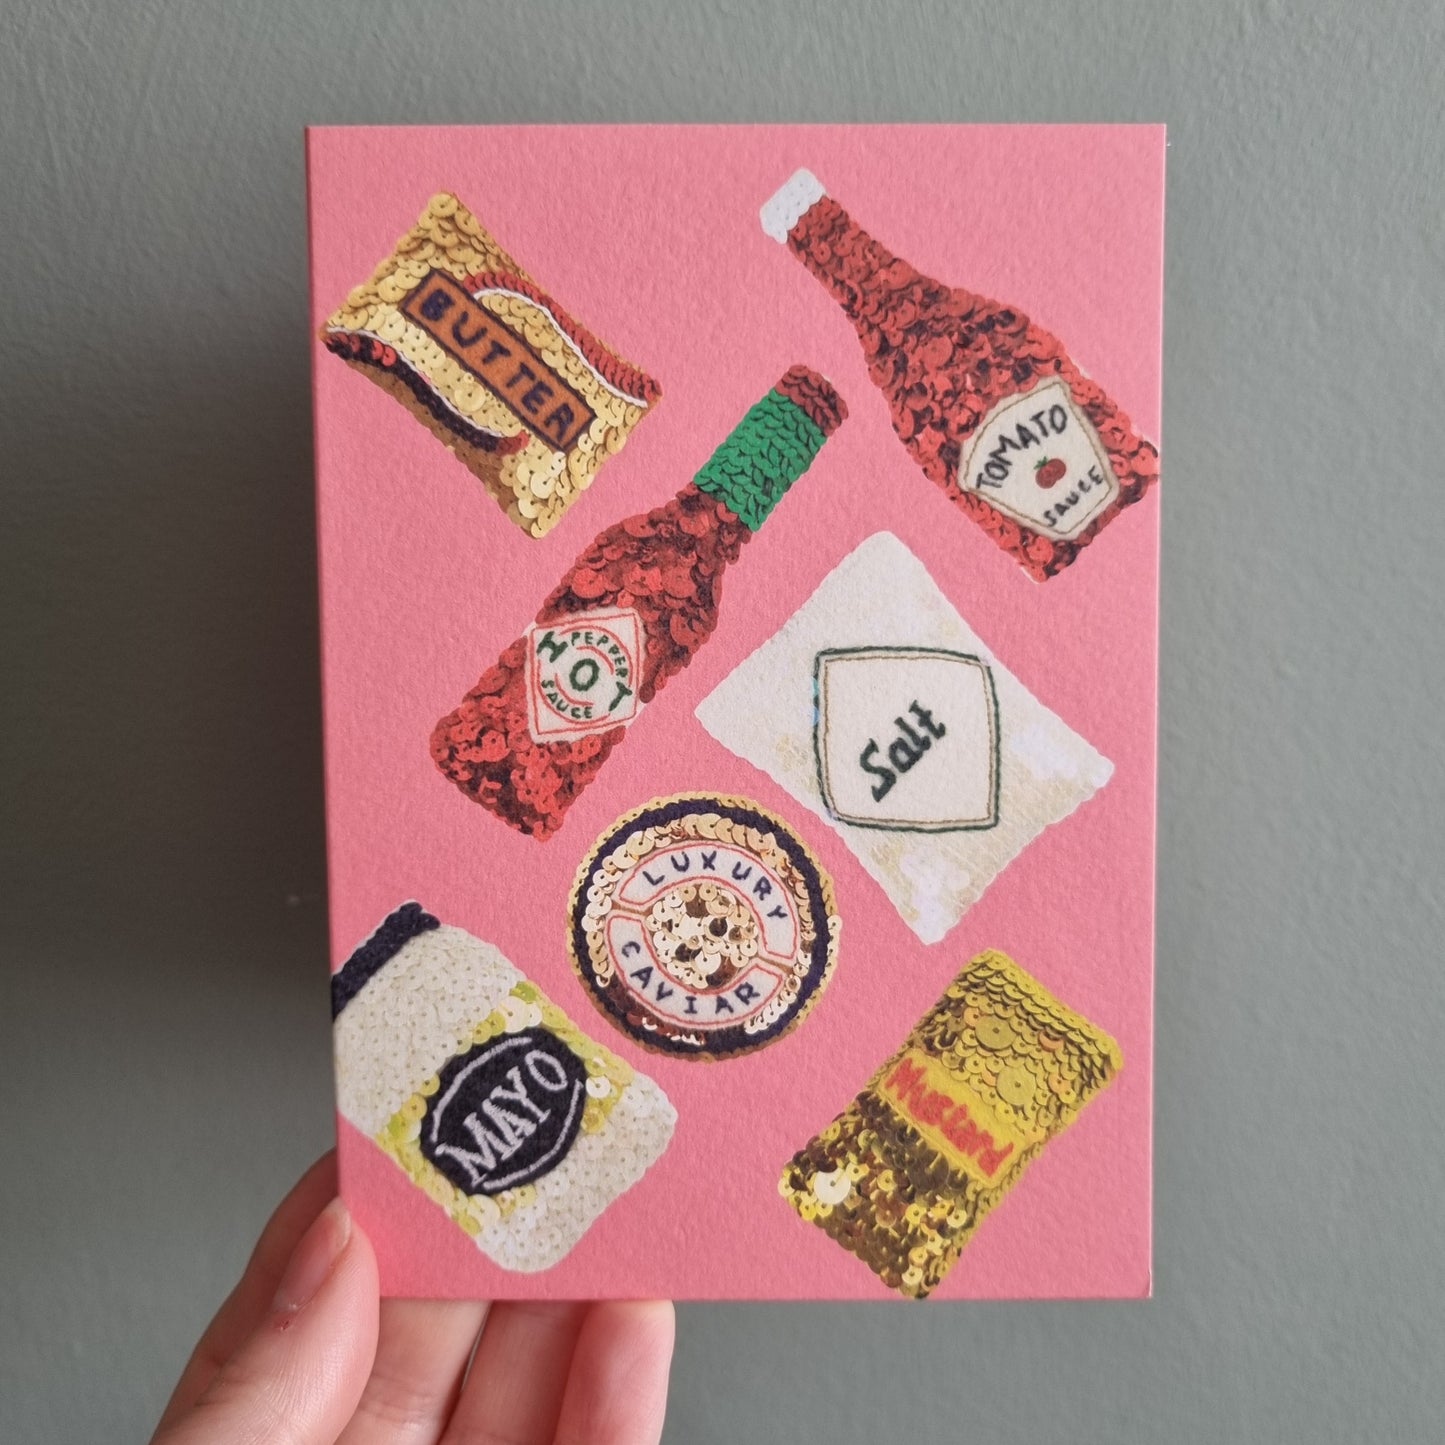 Kate's hand holding a pink card covered with images of condiments from original embroideries